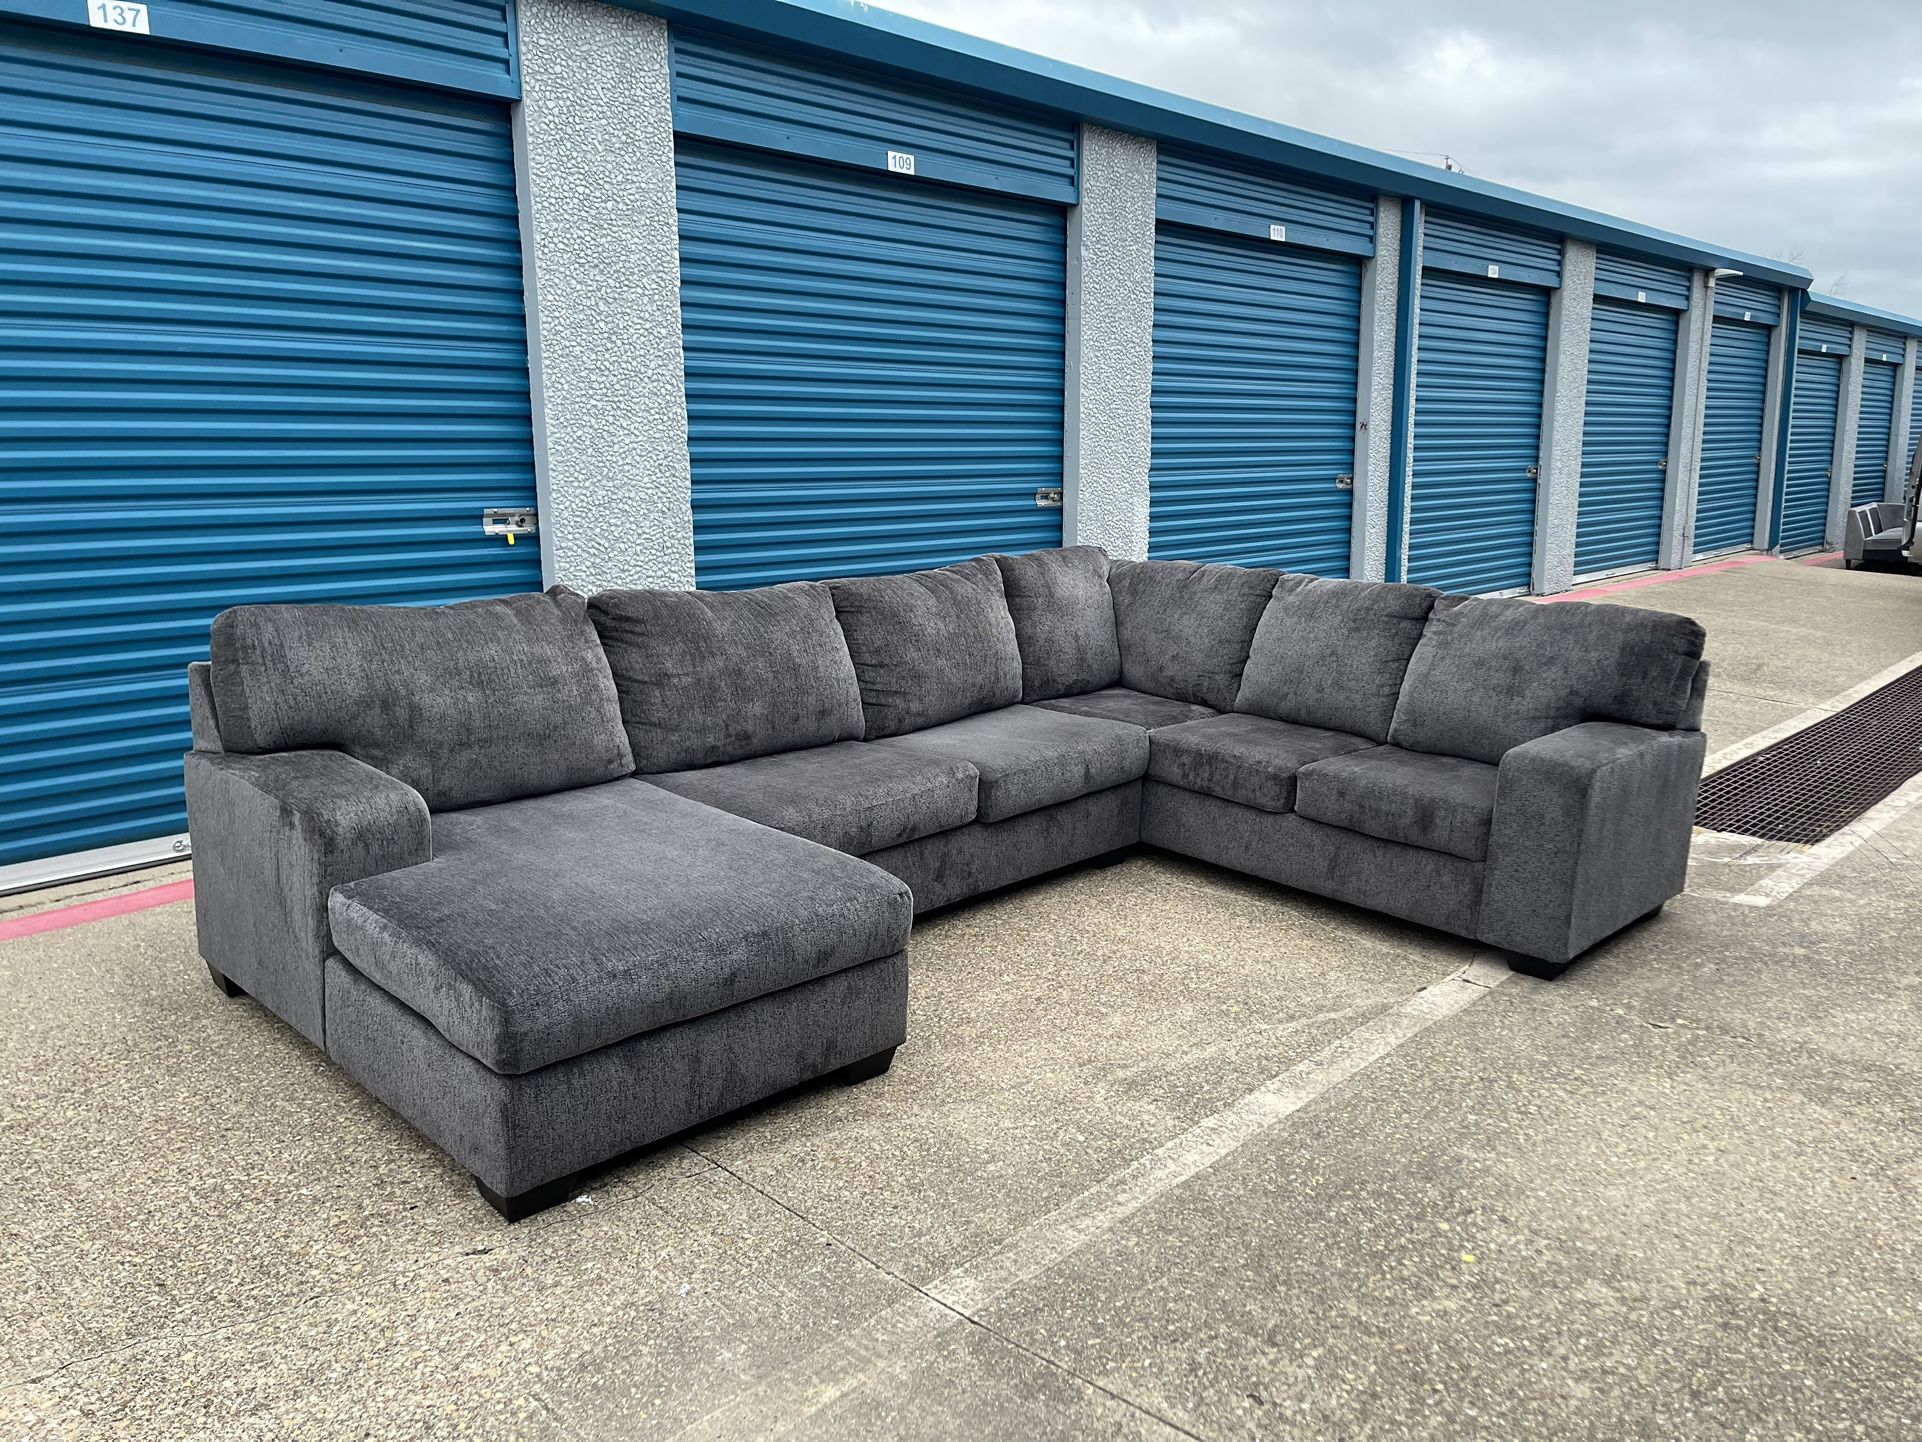 LIKE NEW ❗️ASHLEY FURNITURE ❗️HUGE DARK GRAY SECTIONAL COUCH 🛋  ❗️❗️ FREE DELIVERY 🚚💨❗️